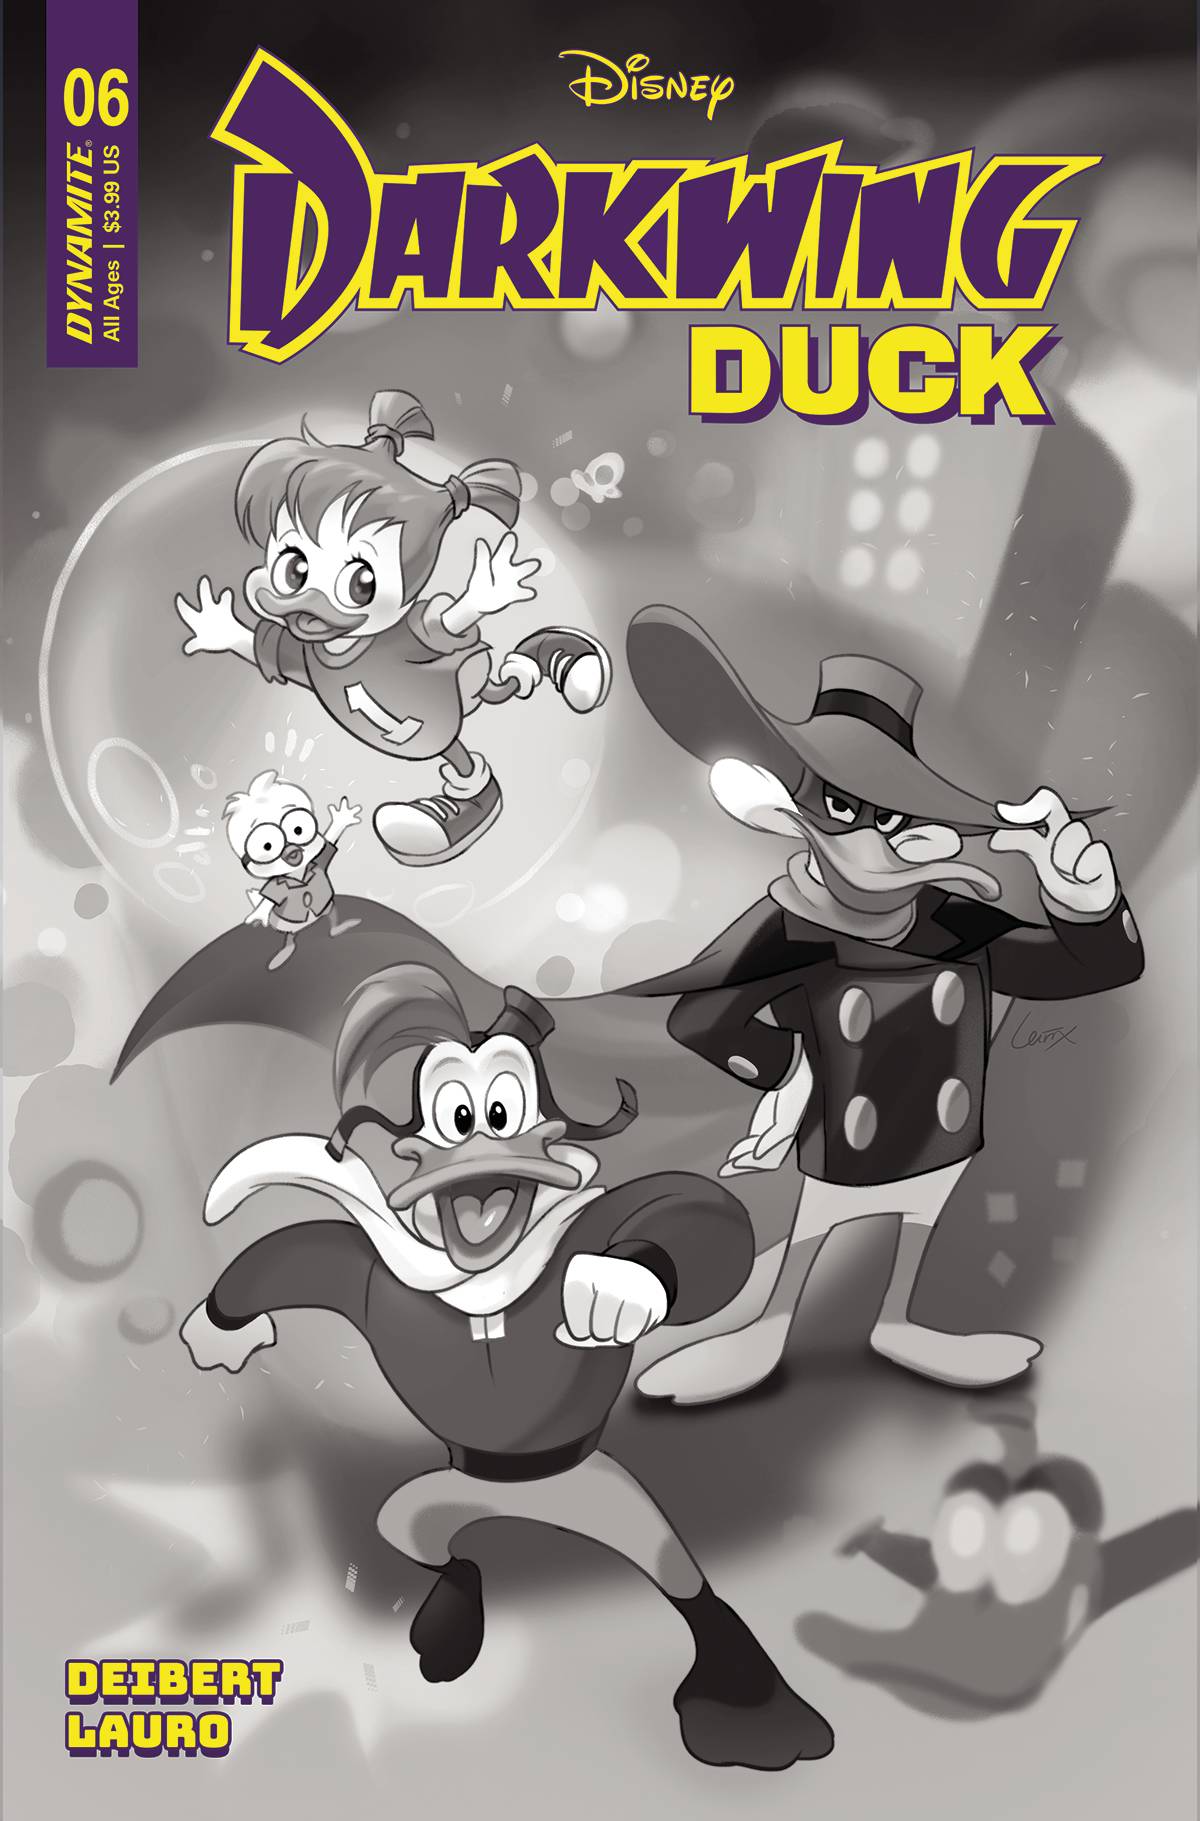 Darkwing Duck #6 Cover G 1 for 10 Incentive Leirix Black & White